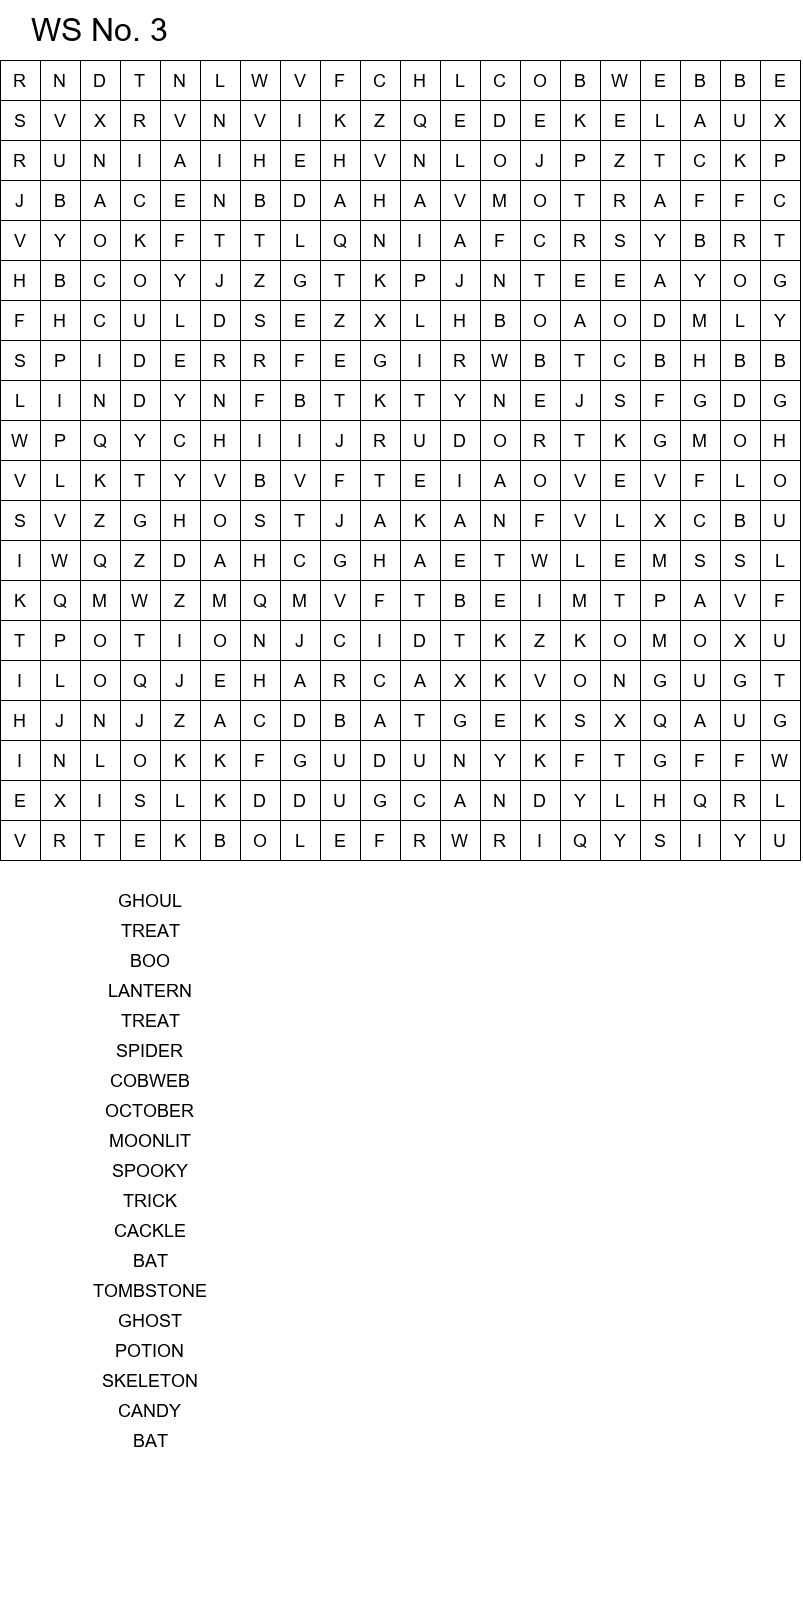 Spooky Halloween word search with solutions size 20x20 No 3